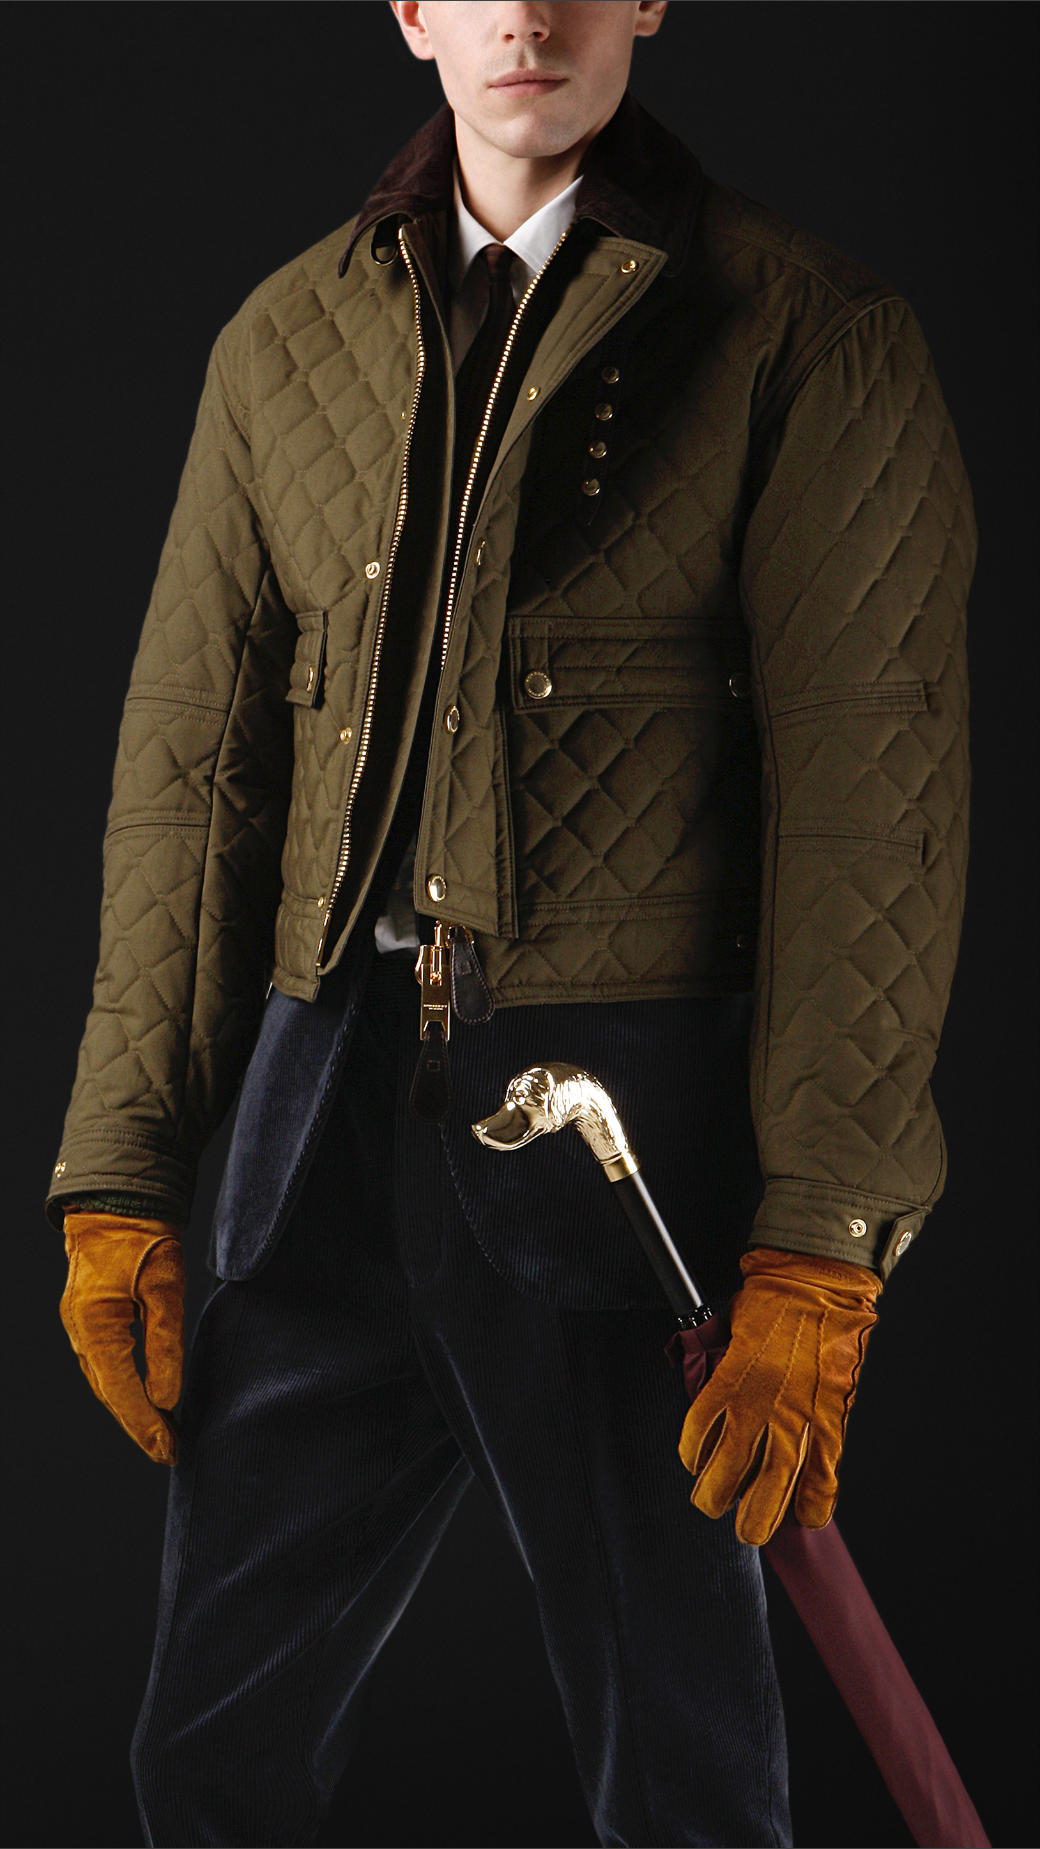 Burberry Prorsum Waxed Cotton Quilted Riding Jacket in Green for Men - Lyst